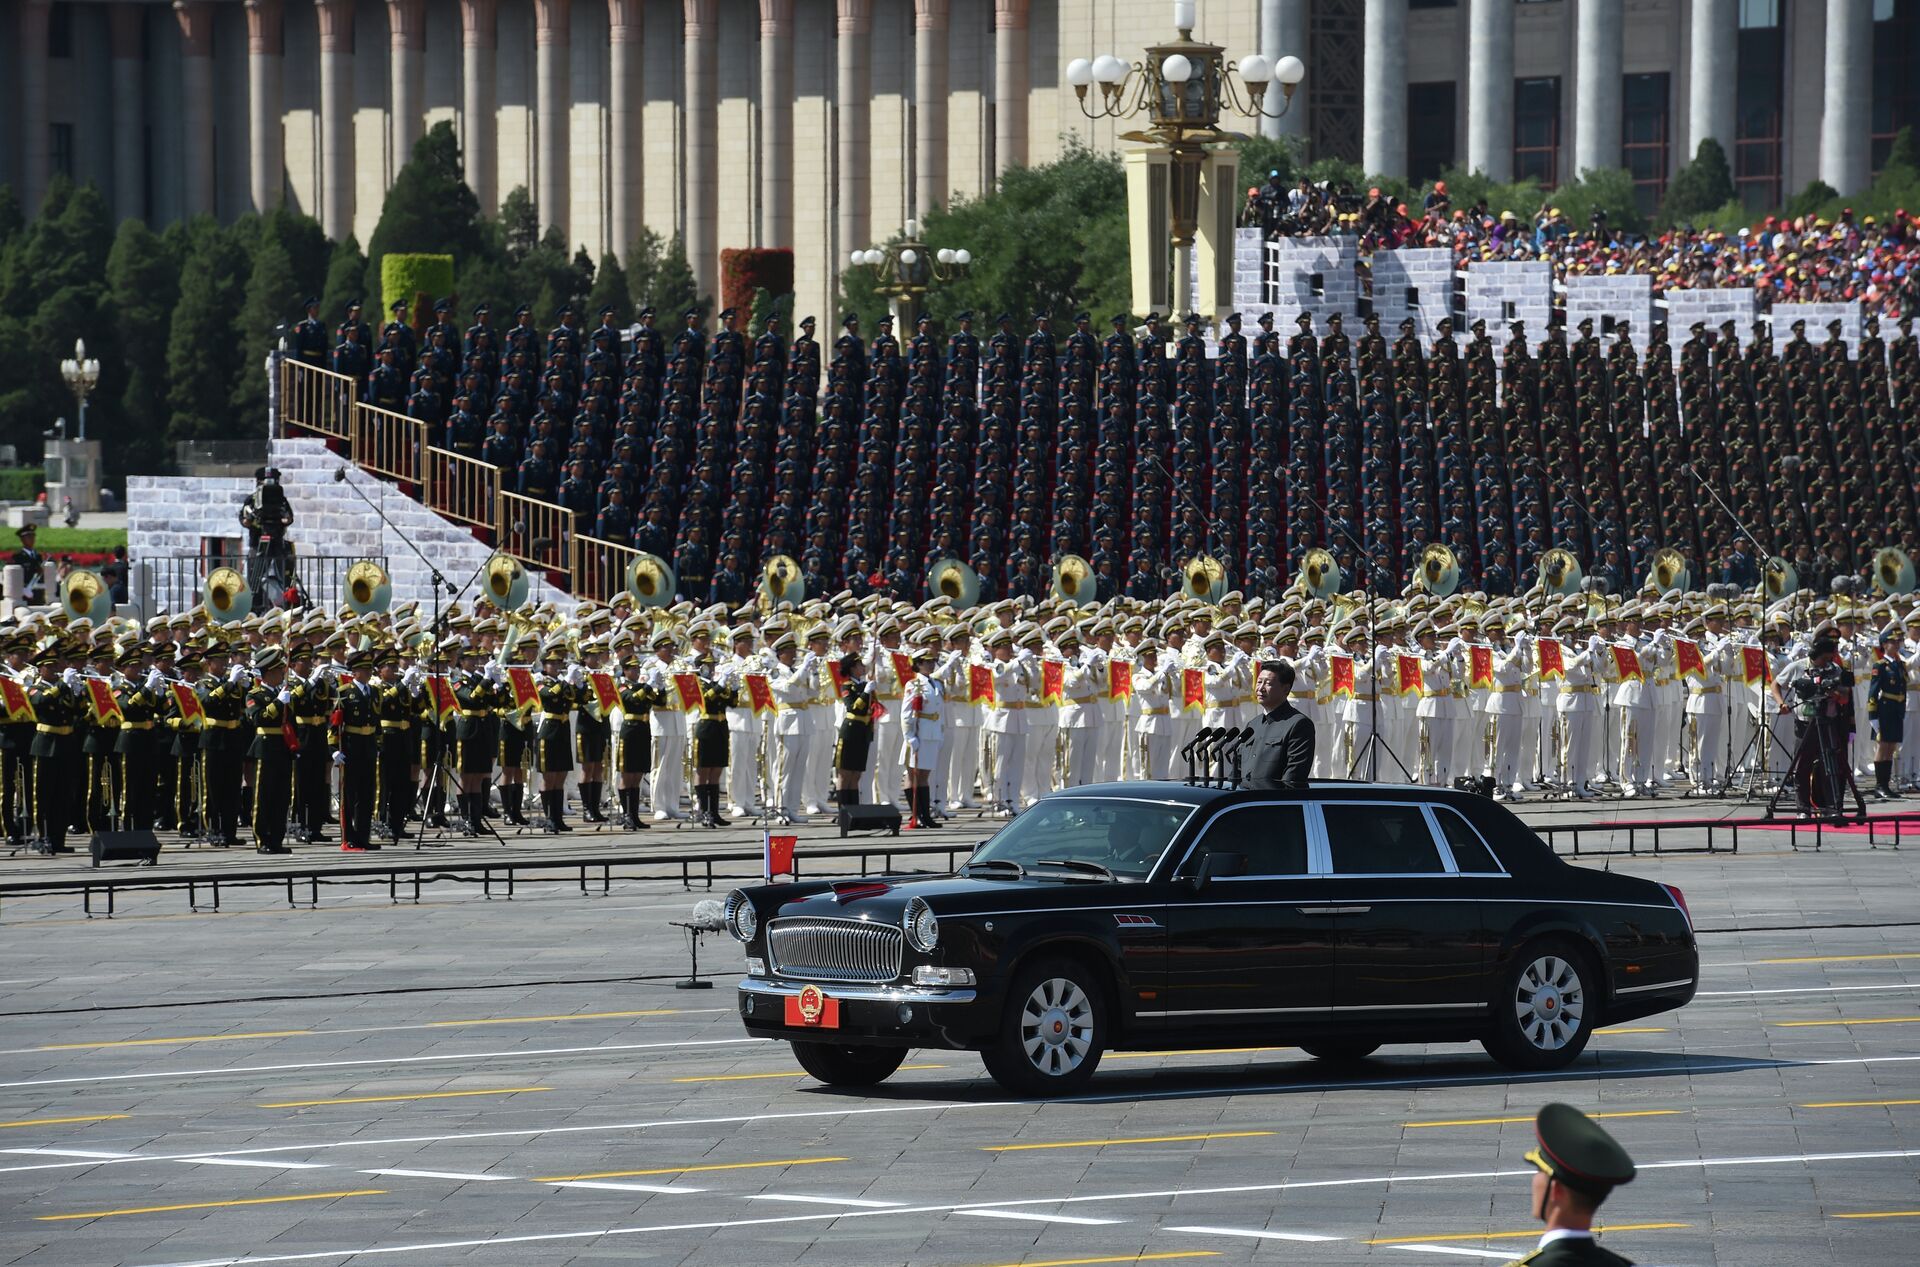 Chinese President Xi Jinping begins a review of troops from a car during a military parade at Tiananmen Square in Beijing on September 3, 2015, to mark the 70th anniversary of victory over Japan and the end of World War II - Sputnik International, 1920, 20.03.2023